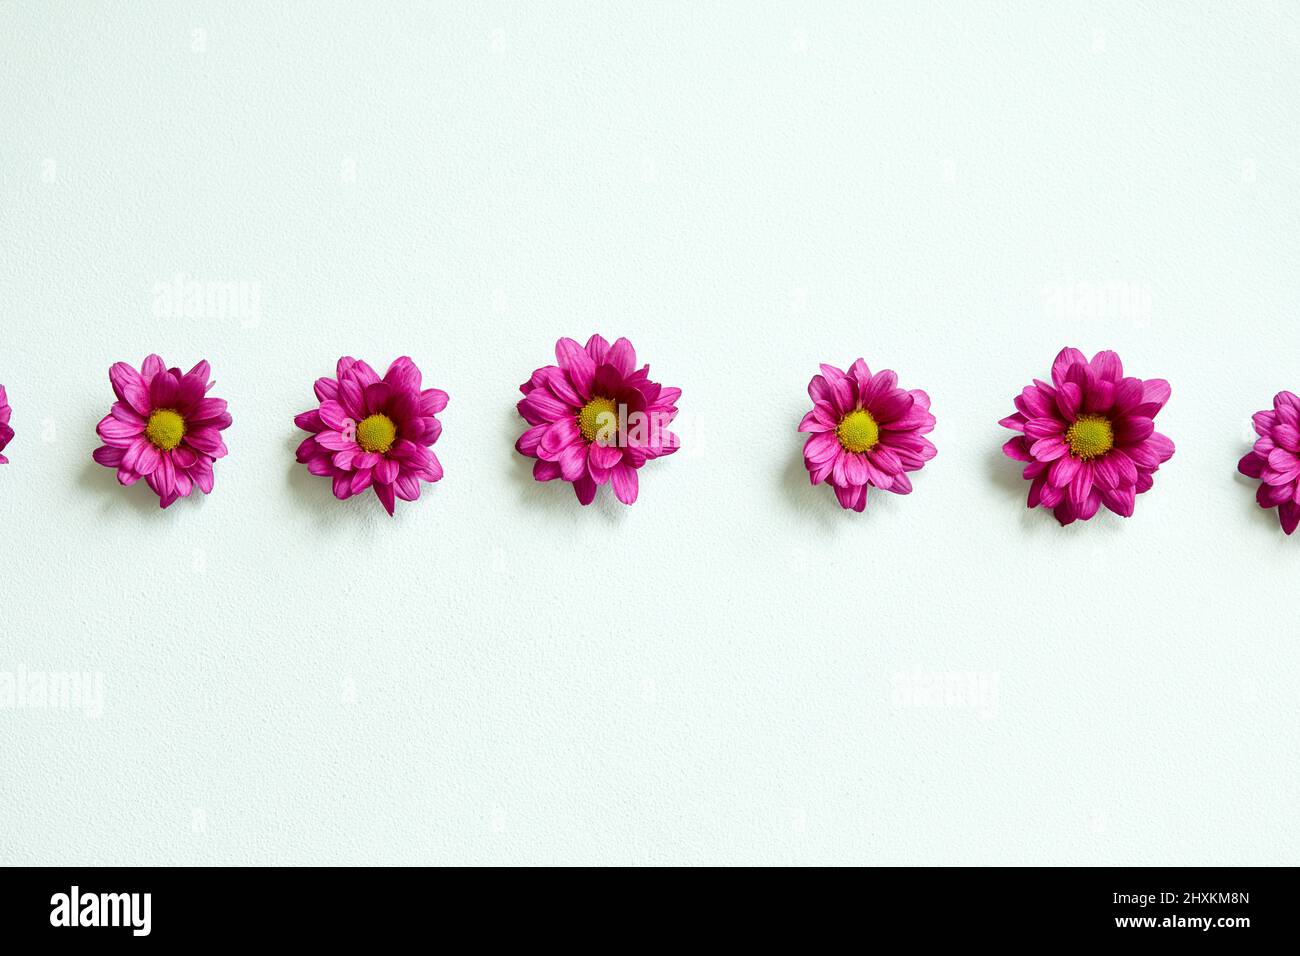 Minimal creative shot of Daisy bright pink isolated on white background. Flowers Close-up. For design. Nature. Blossom, flowers, flora concept. flat l Stock Photo